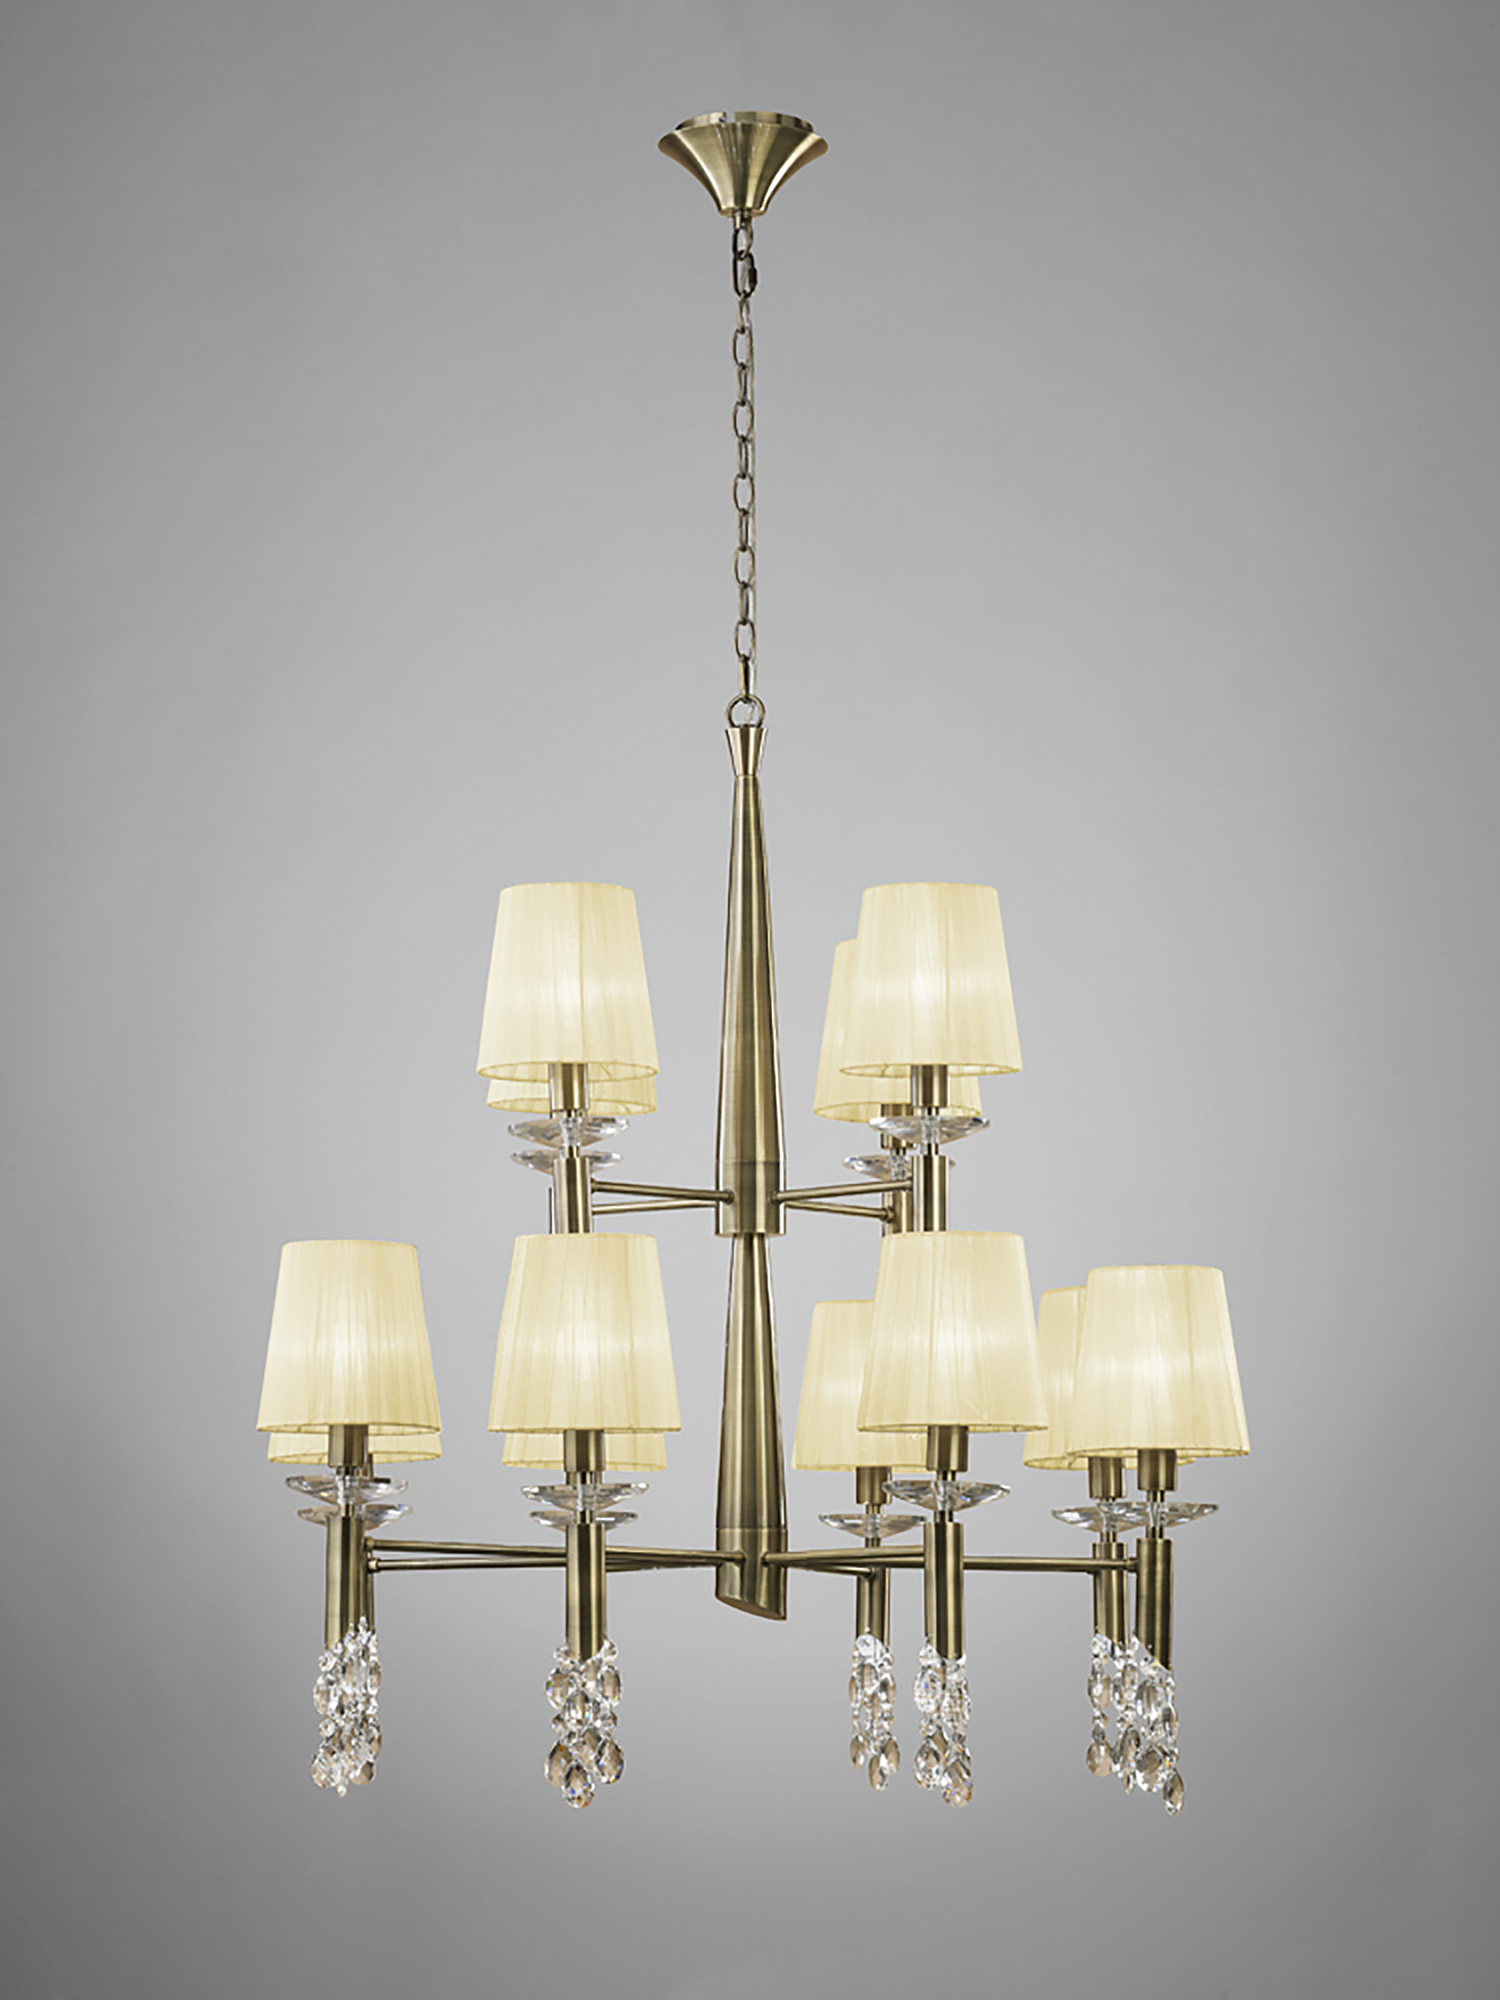 Tiffany AB Crystal Ceiling Lights Mantra Tiered Crystal Fittings